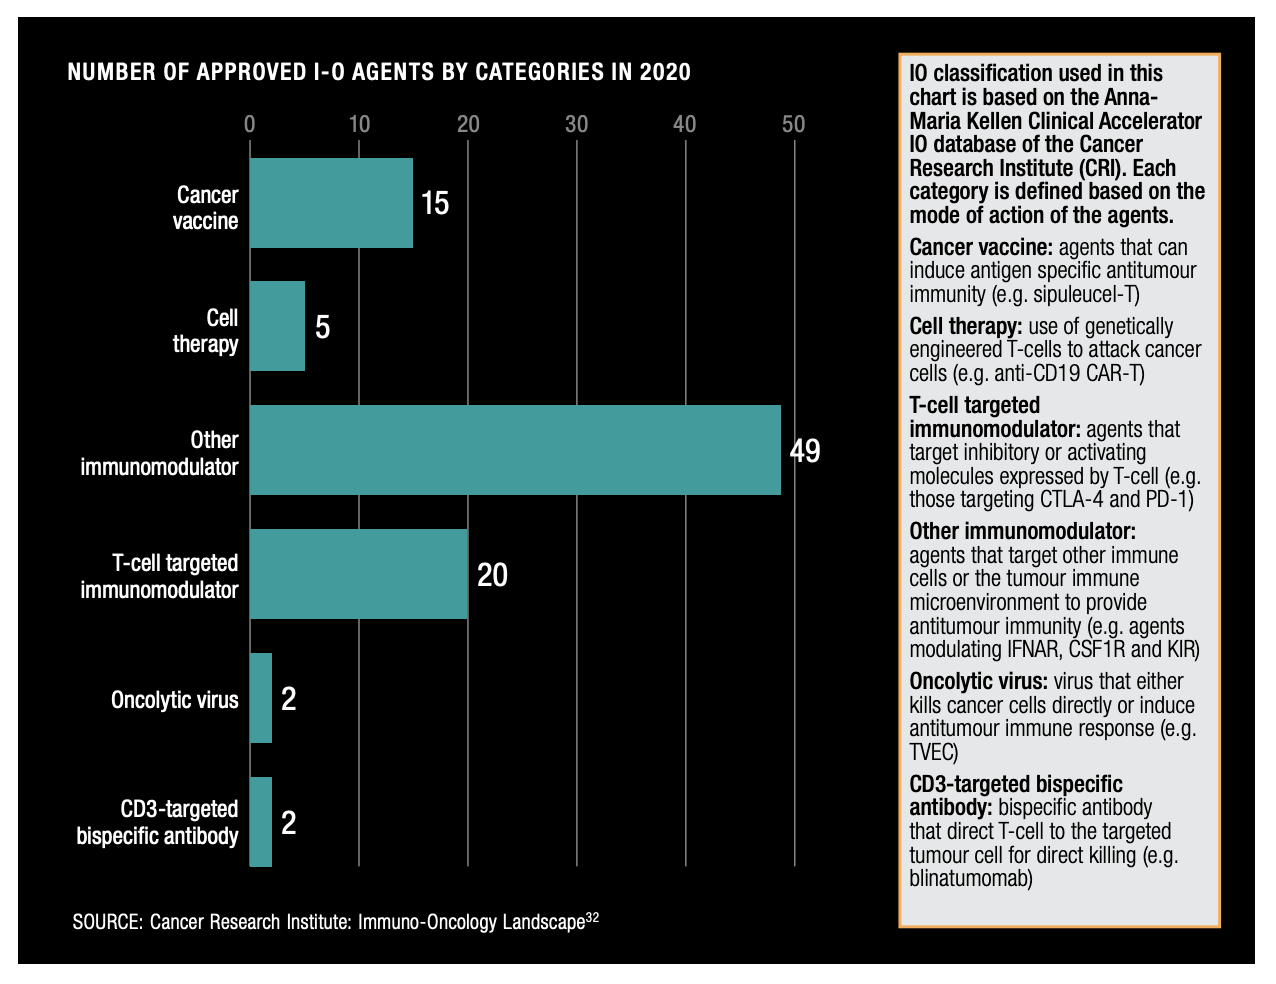 Figure 14: Number of Approved I-O Agents by Categories in 2020